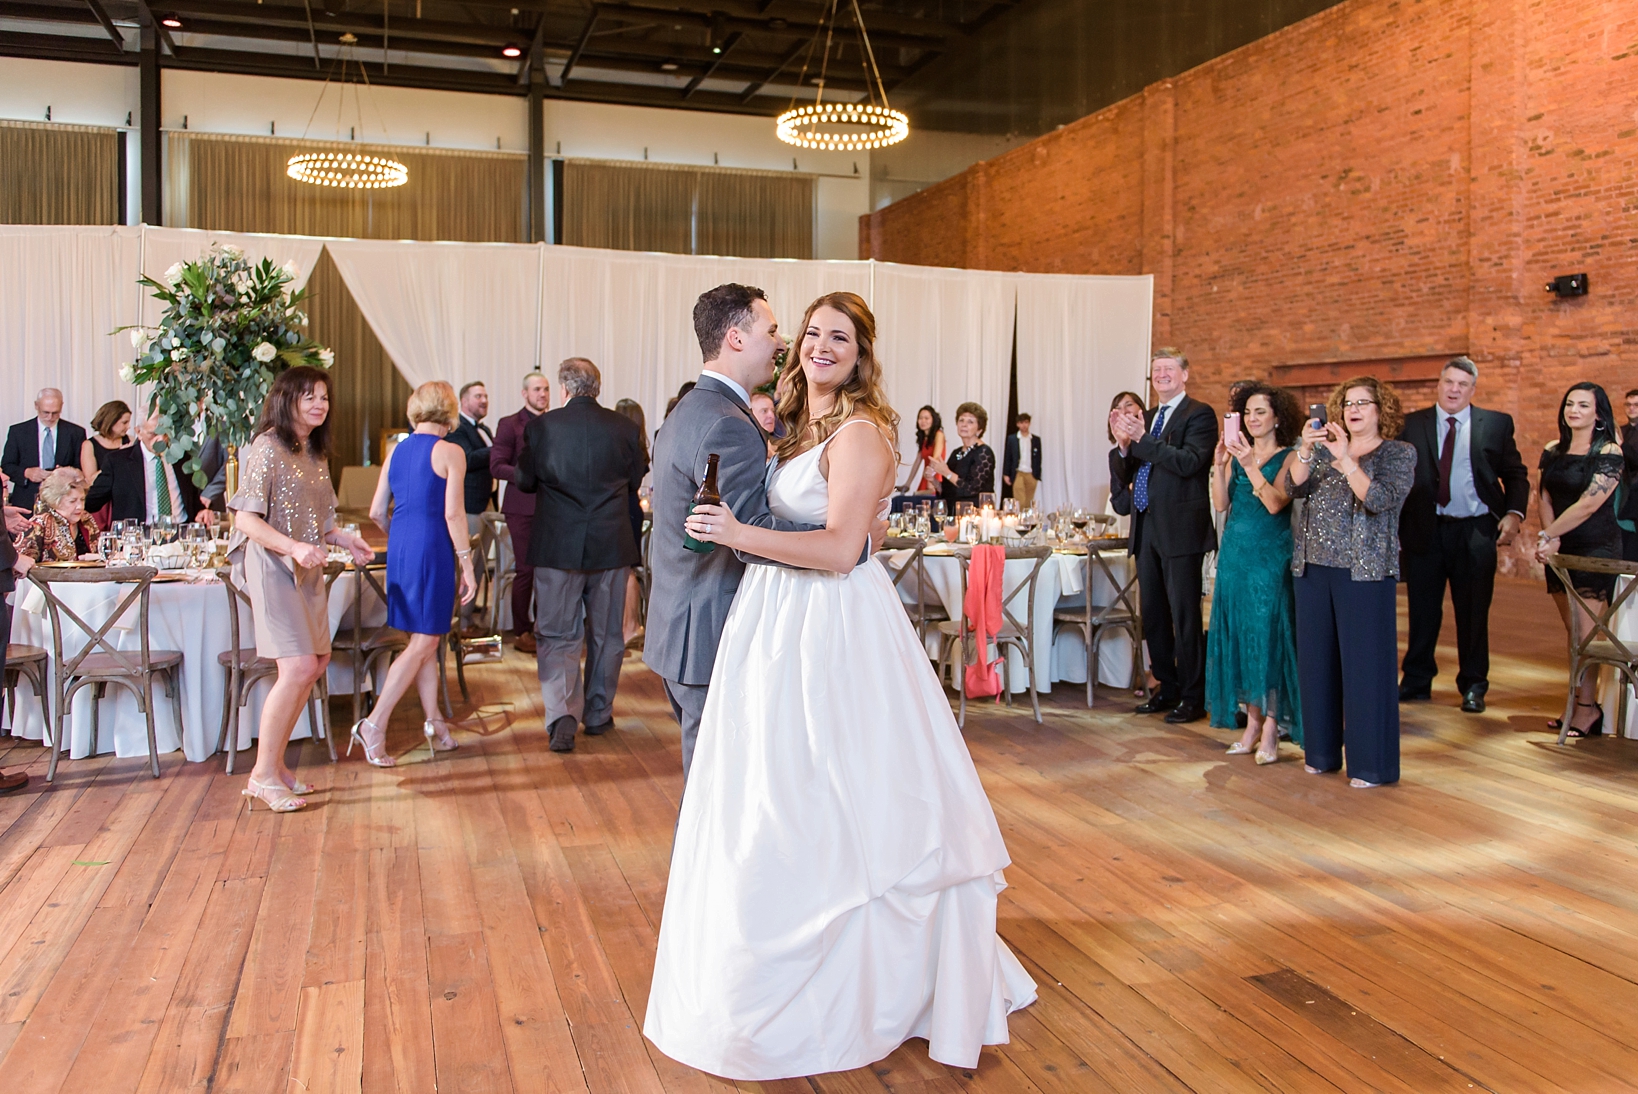 Bride and groom share their first dance while holding beer as family look on